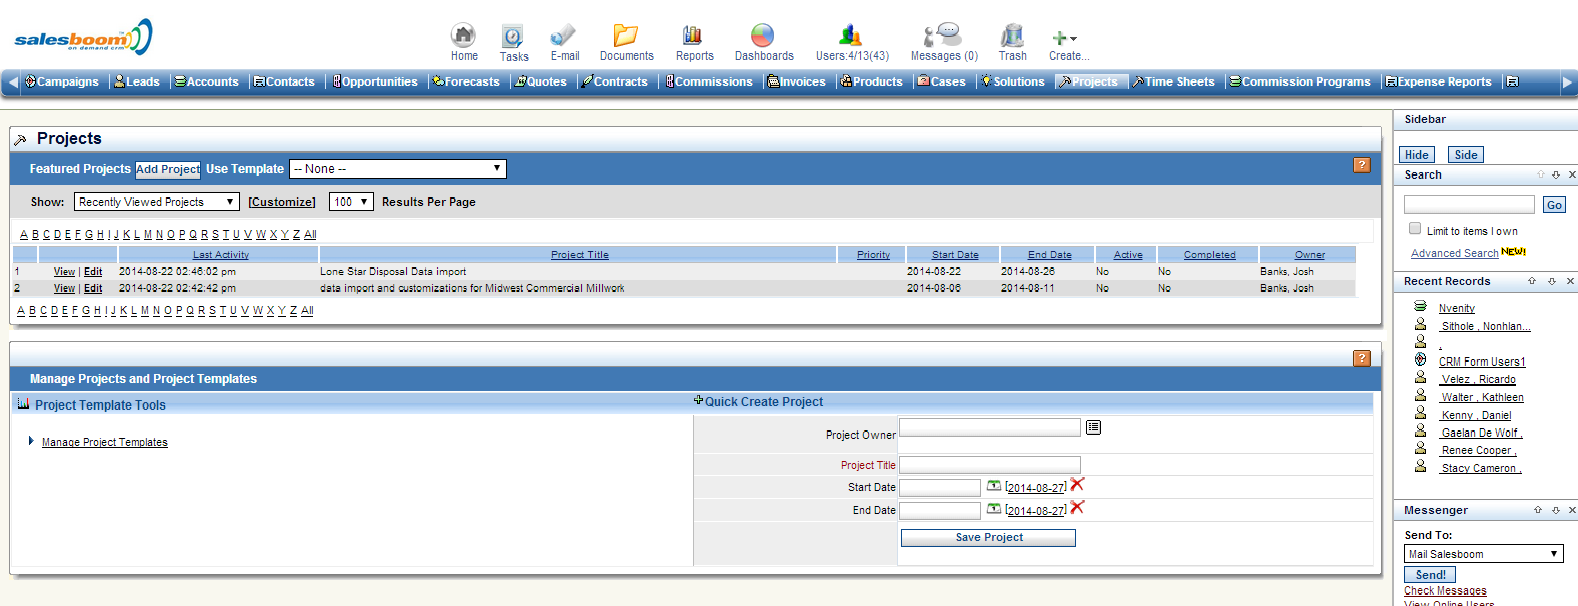 crm-project-management-software-screenshot-by-salesboom